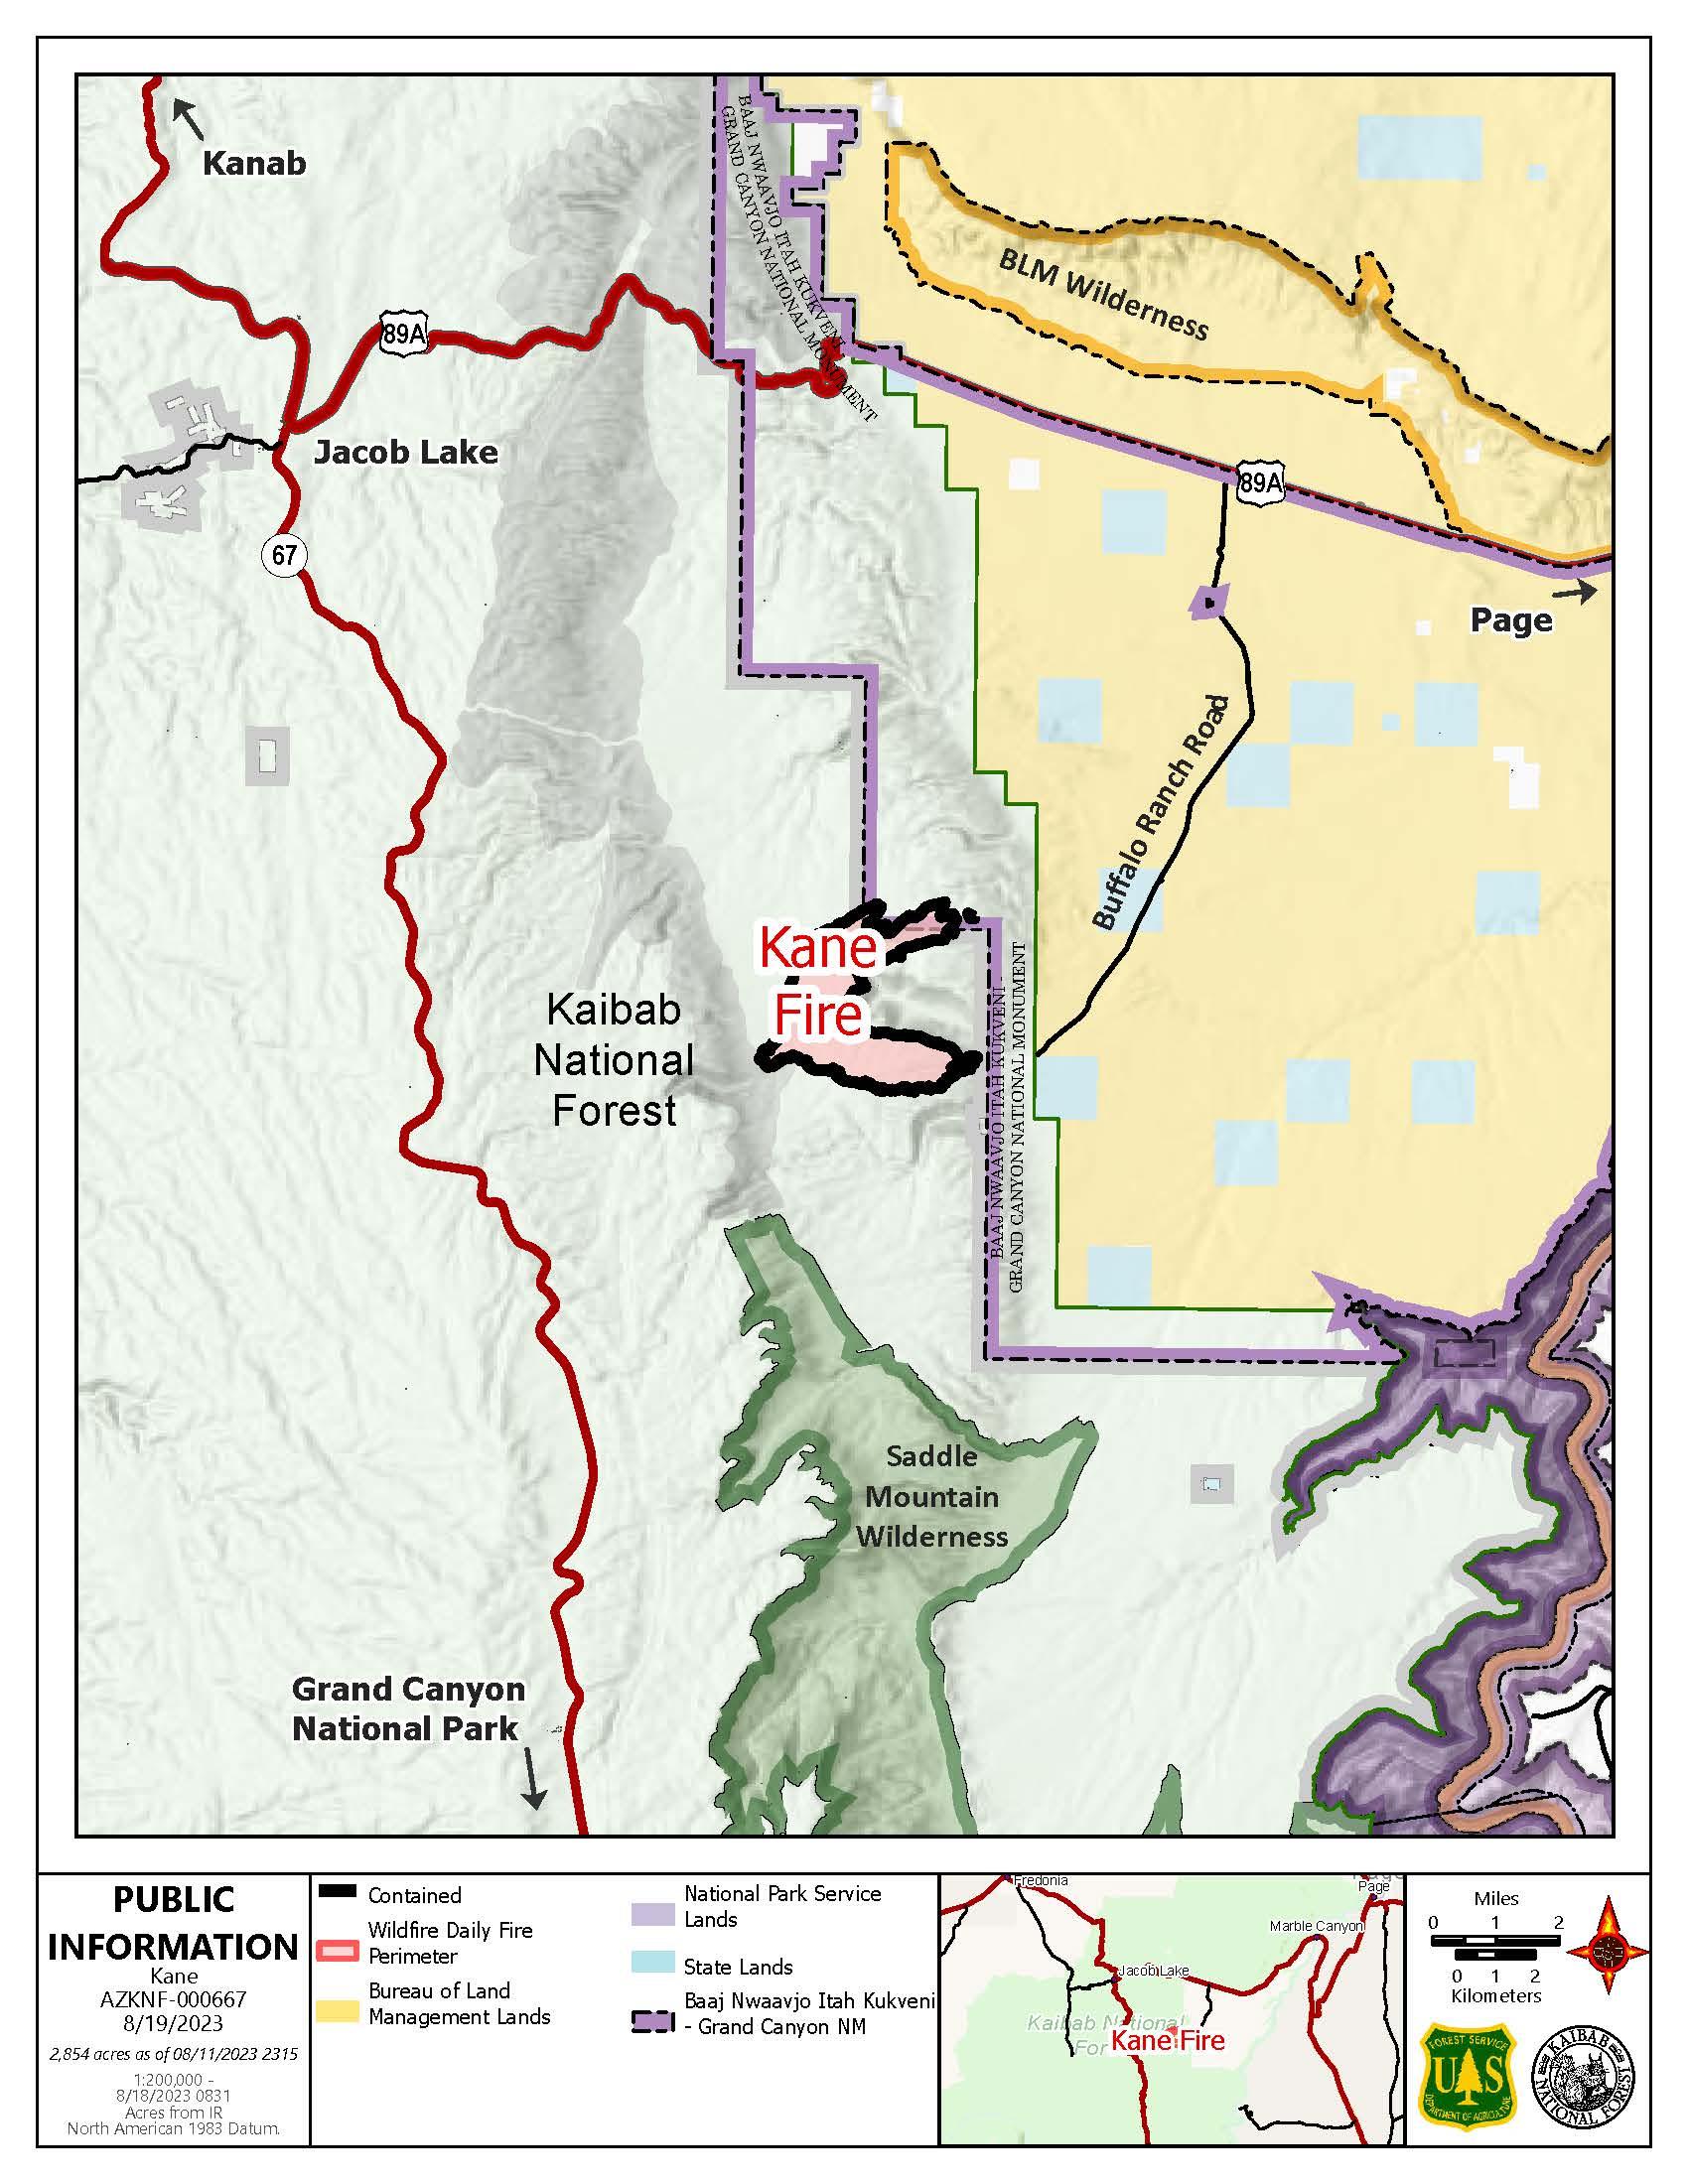 Map of the Kane Fire area as of 8/18.